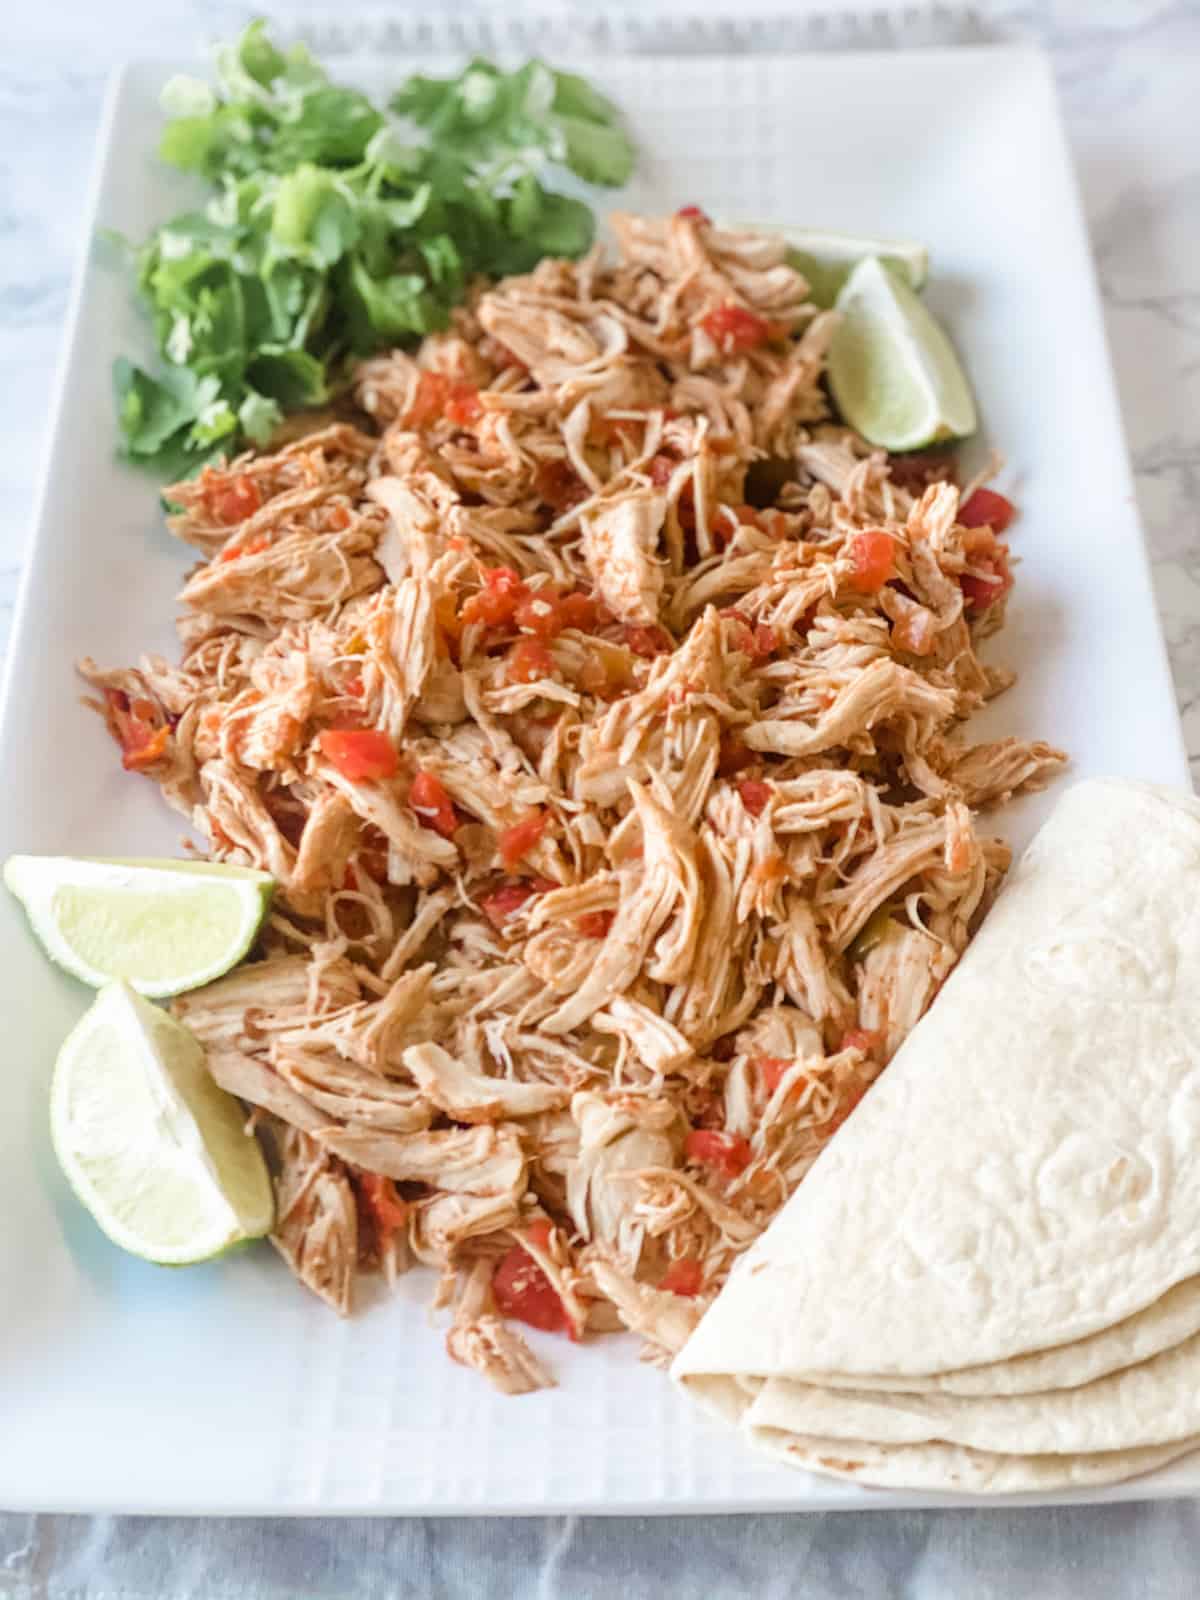 Slow cooker salsa chicken shredded on a platter with tortillas and lime